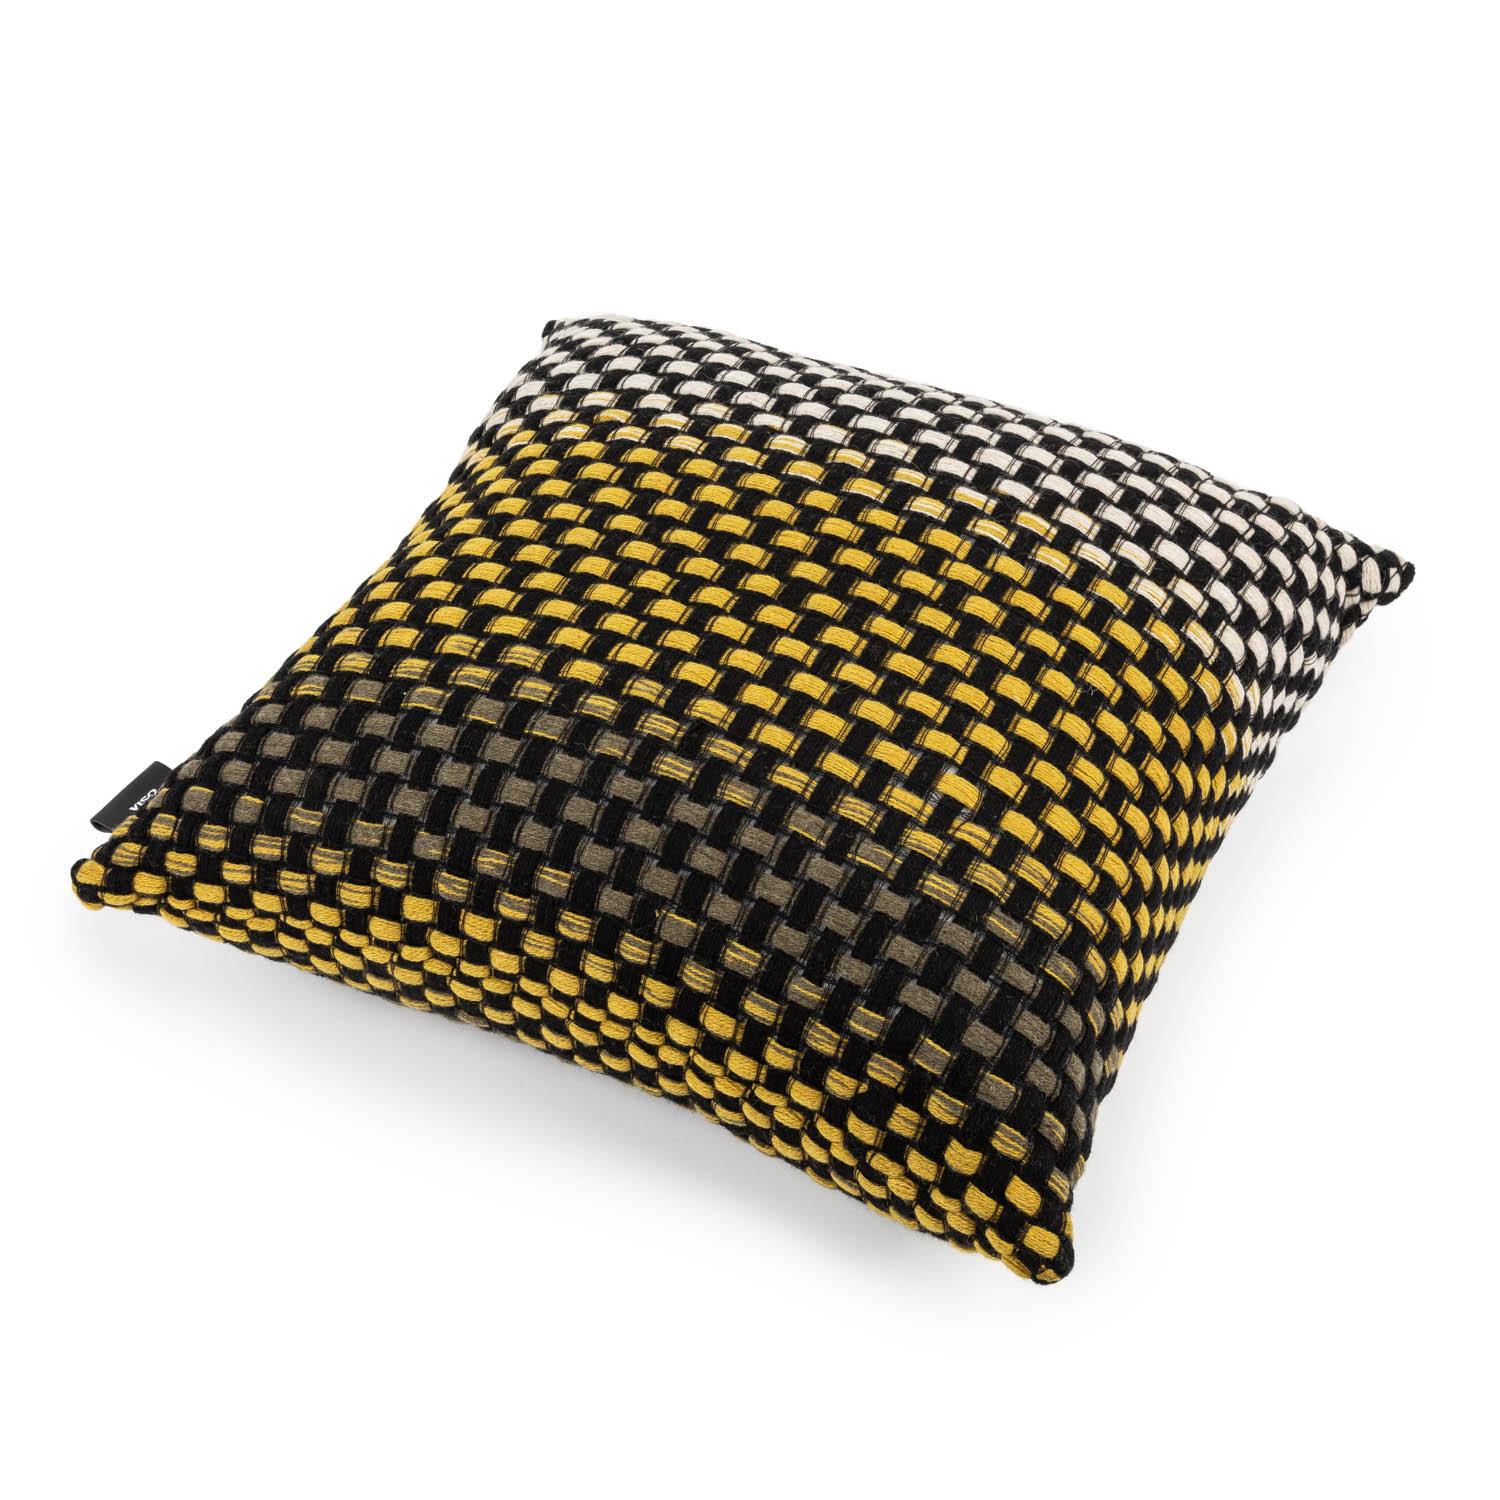 This exquisite pillow takes a twist on traditional technique: it adopts the intrecciato, or basket, weave, typically used with leather to create an intricate weave in wool. The craftsmanship here is nothing short of masterful, from the controlled